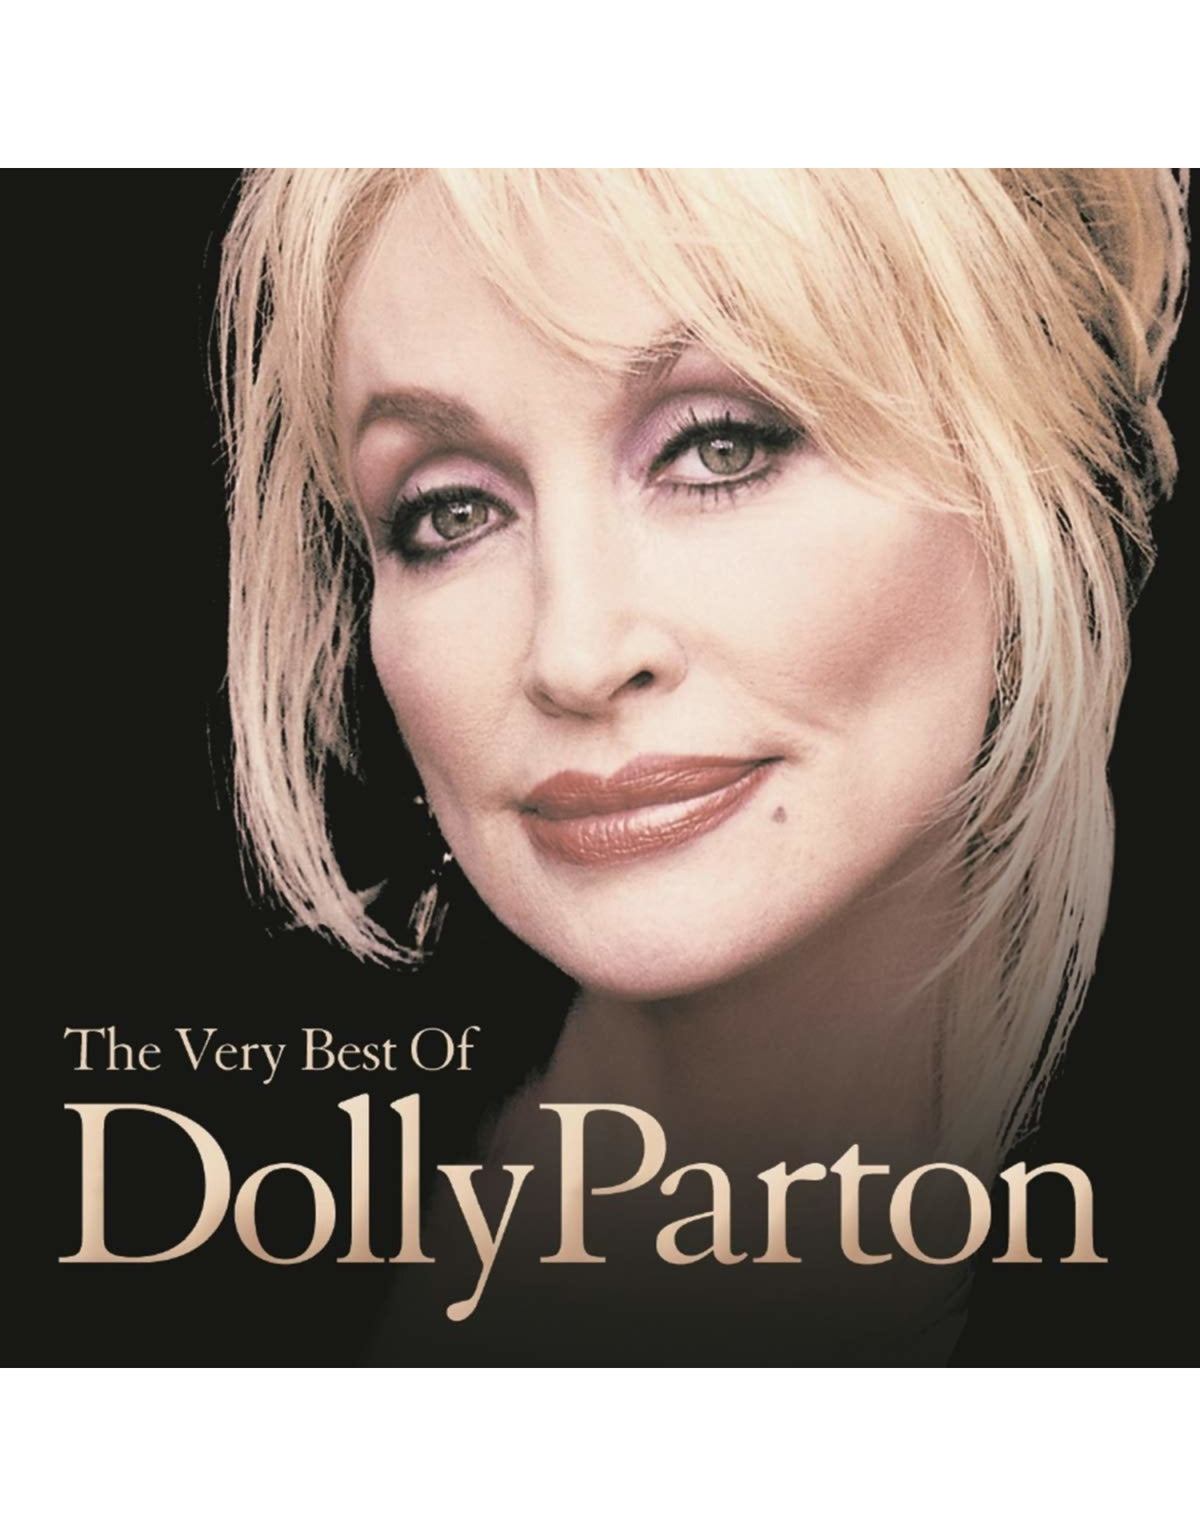 Dolly Parton - The Very Best of Dolly Parton (LP)